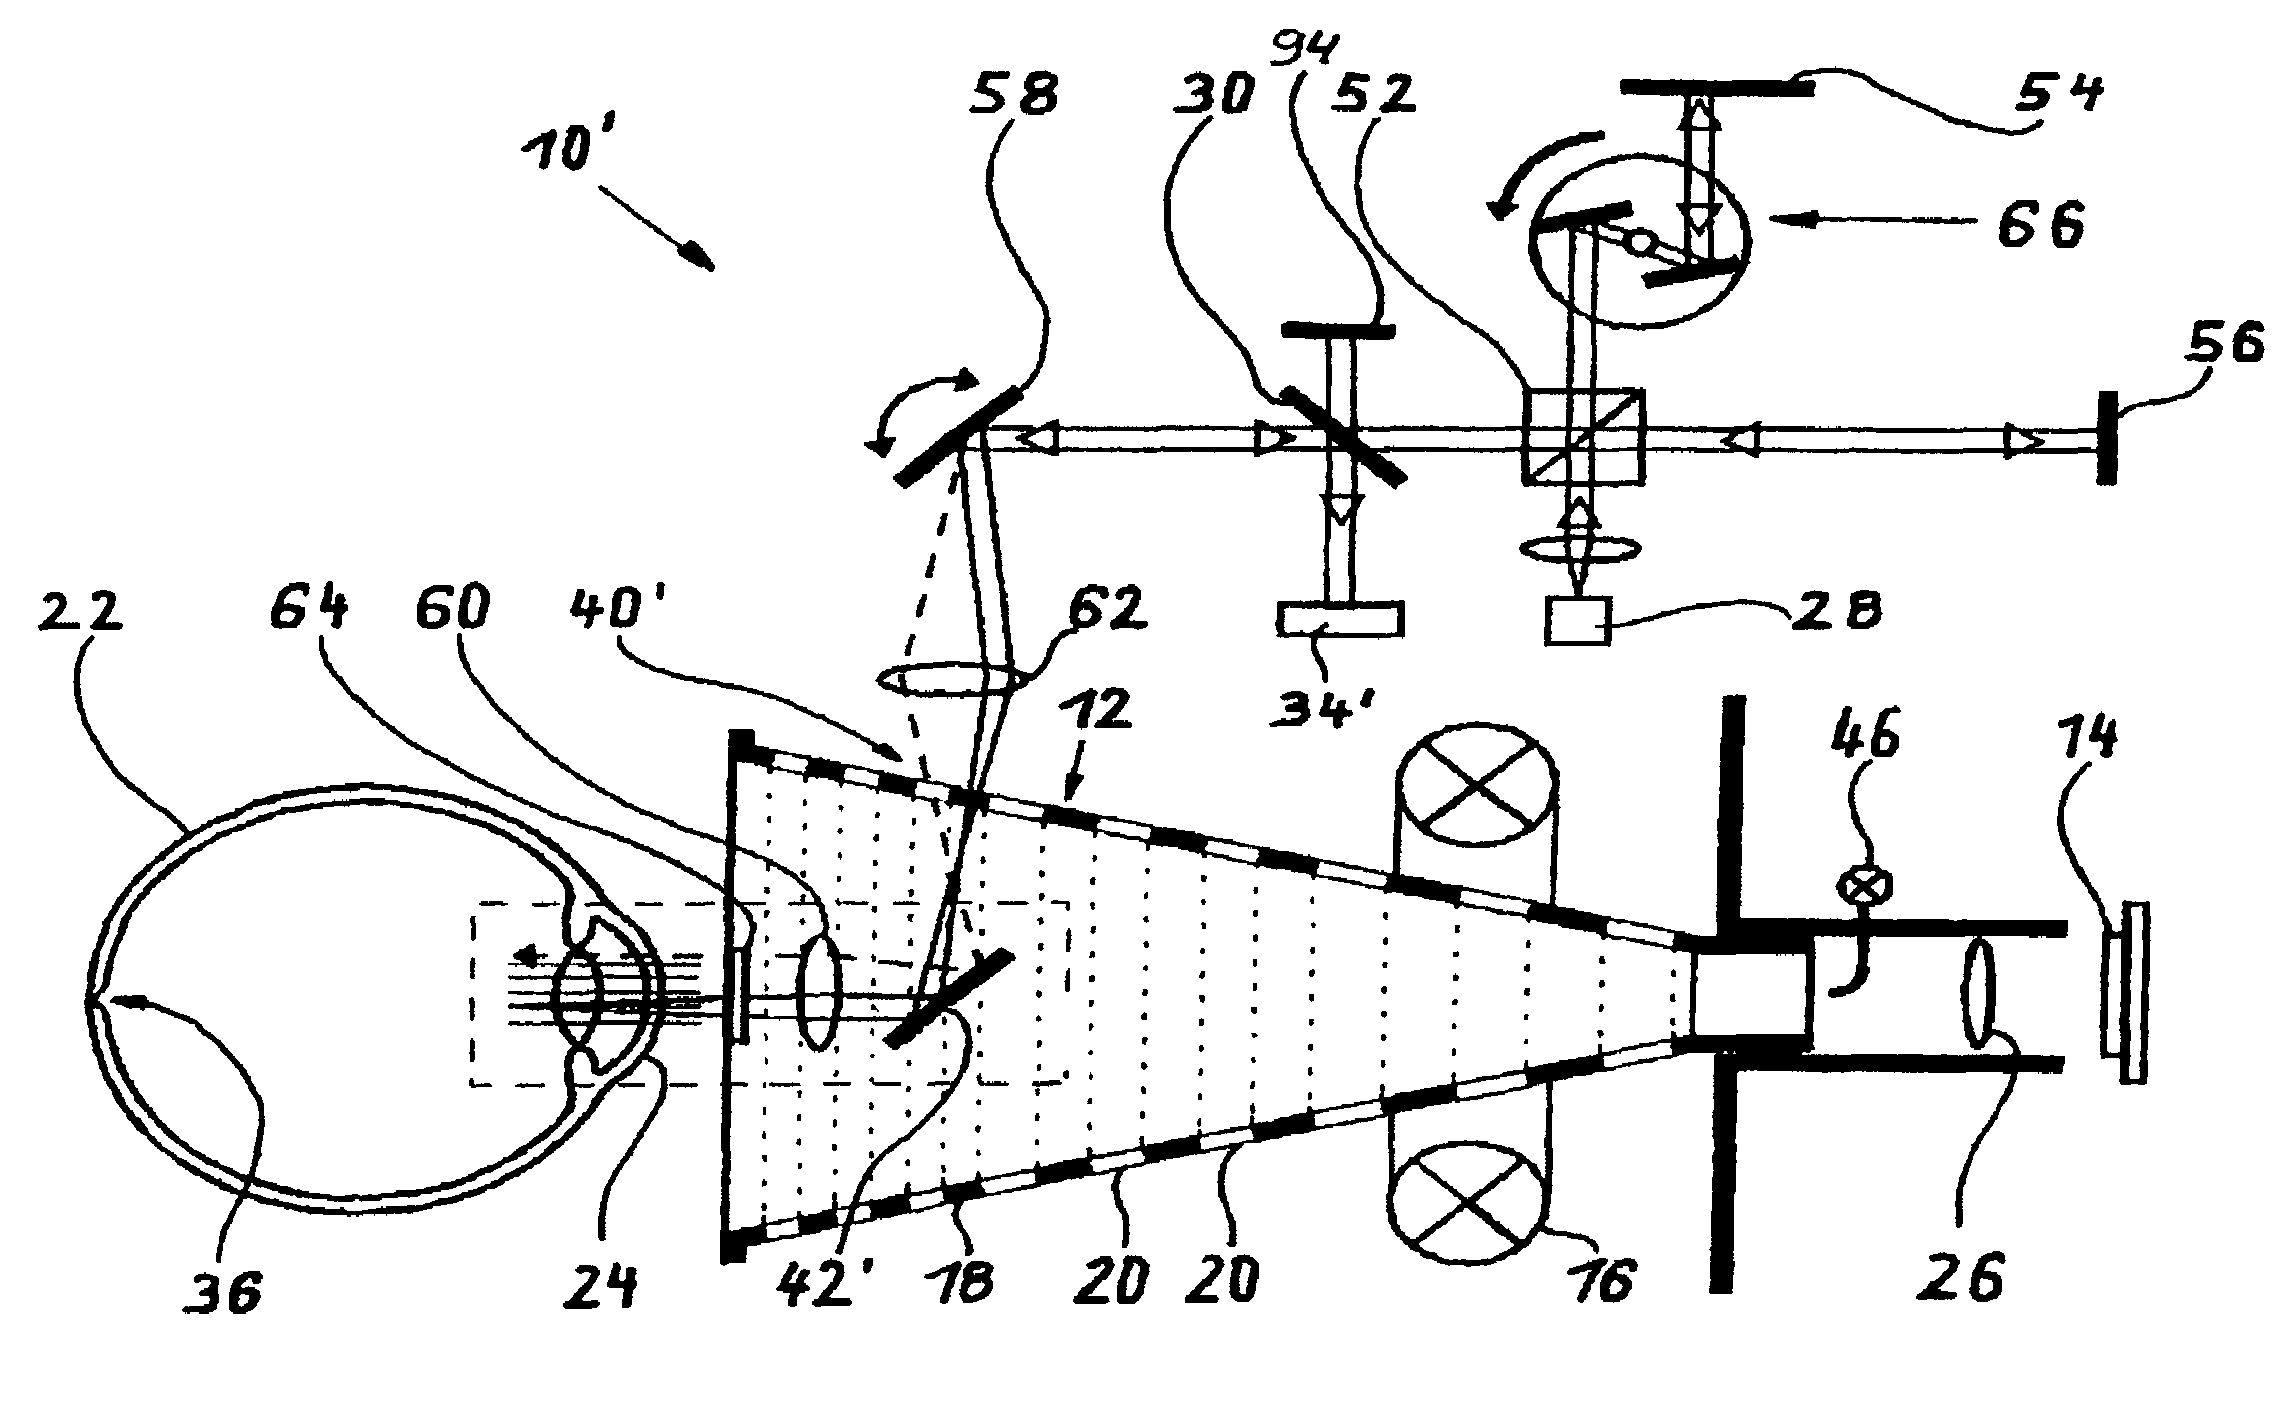 Method and an apparatus for the simultaneous determination of surface topometry and biometry of the eye